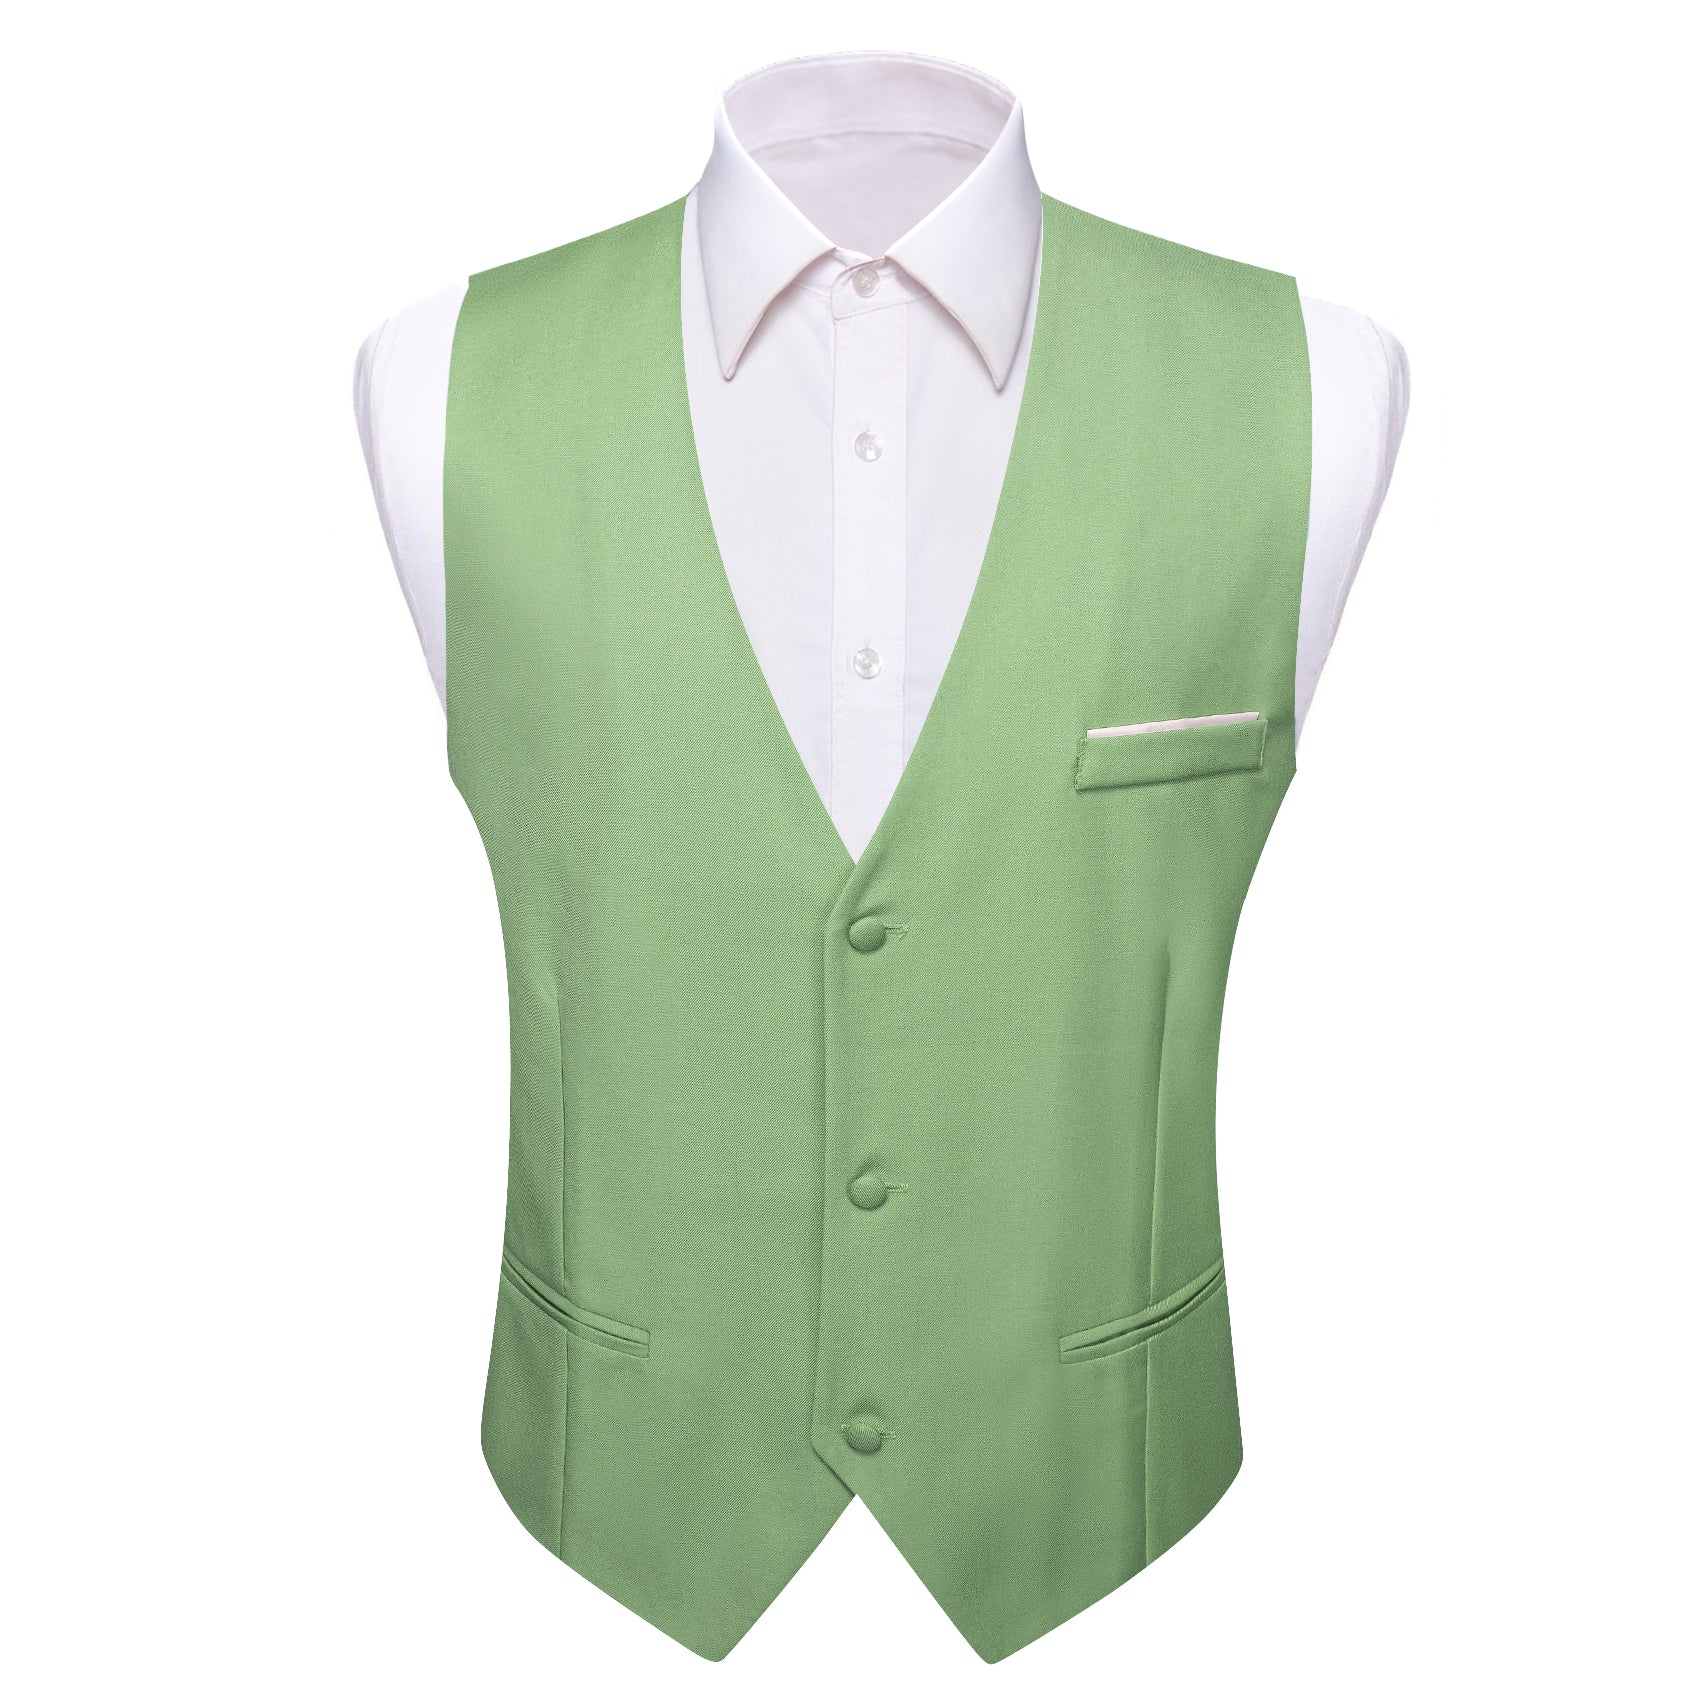 Barry.wang Turquoise Green Solid Business Vest Suit